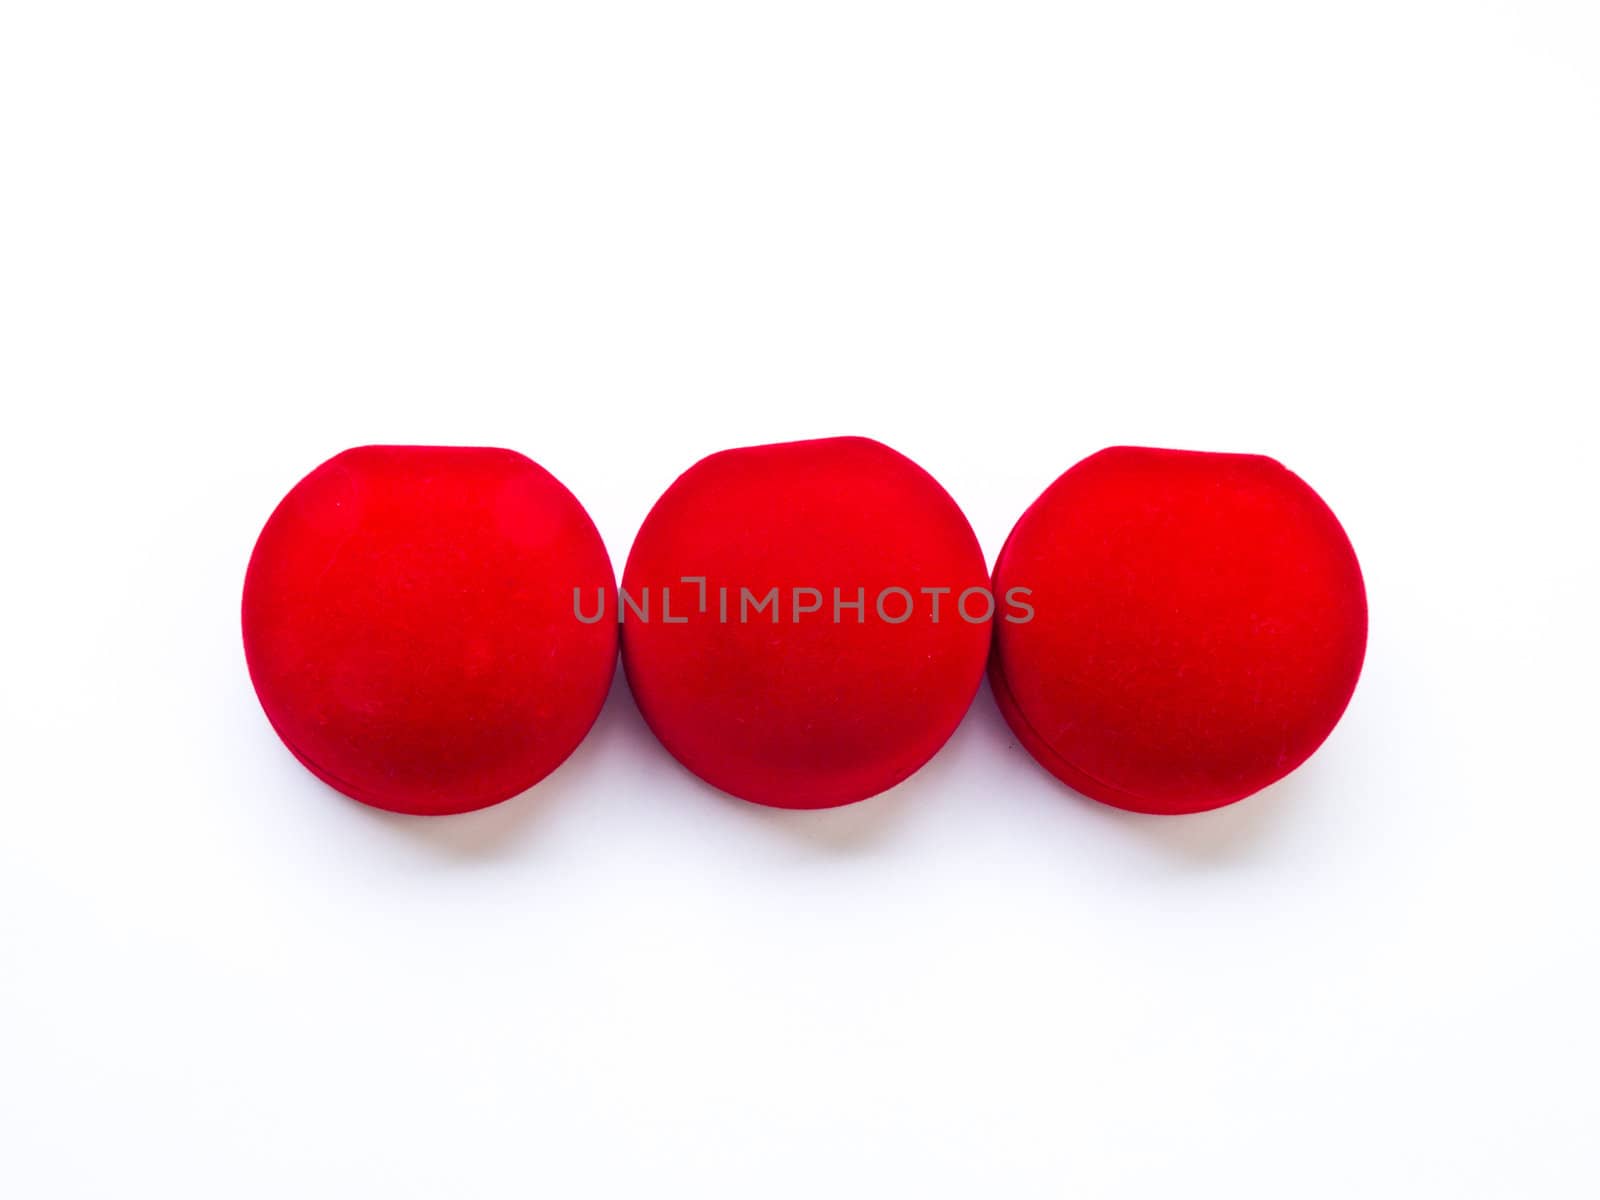 Closed round red jewelry boxes isolated on white background